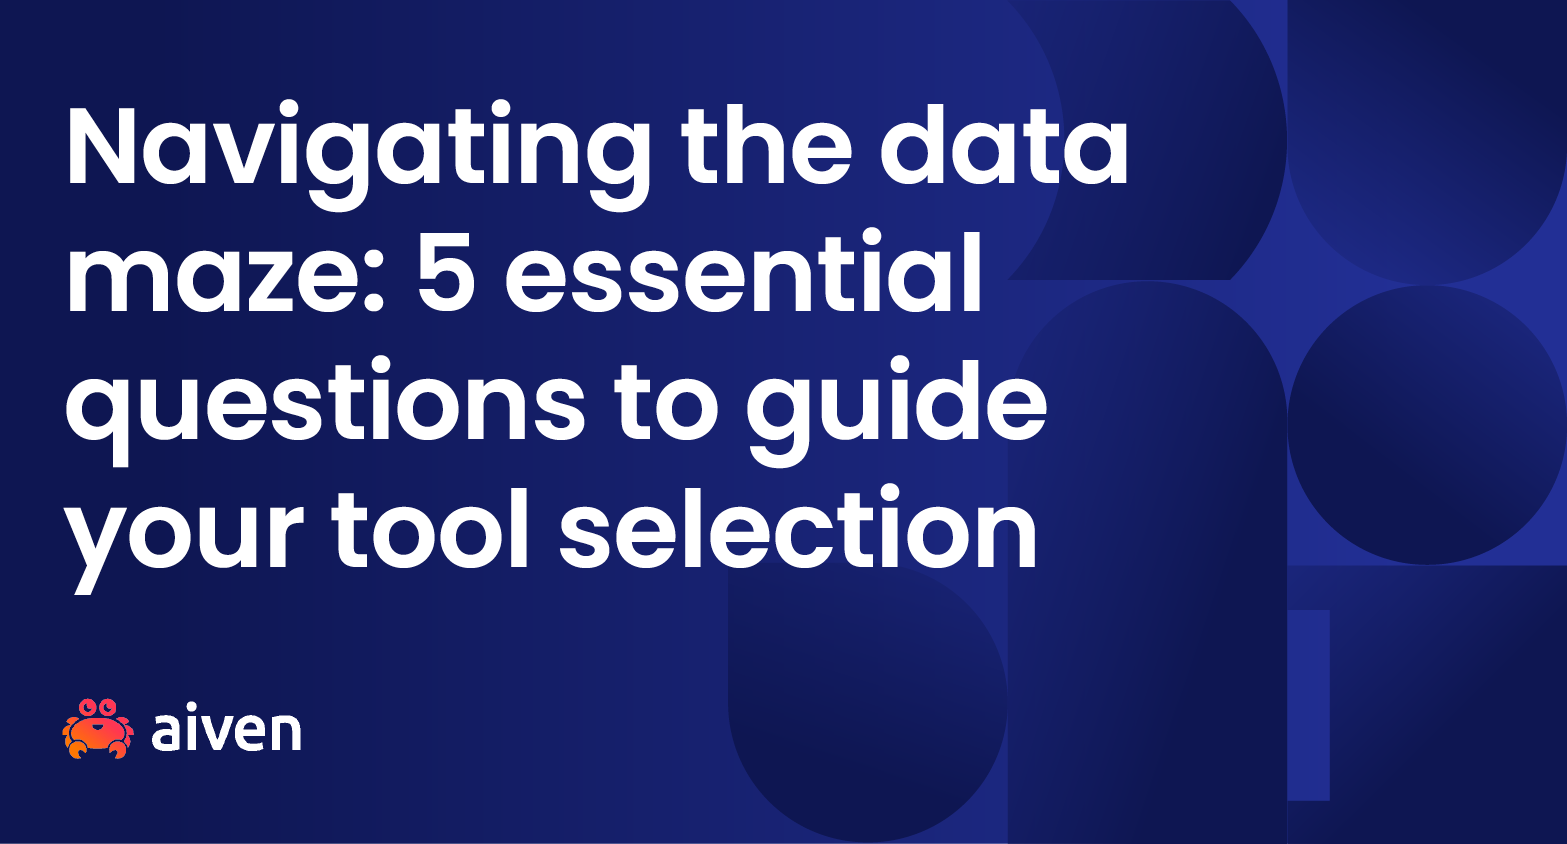 The words "navigating the data maze: 5 essential questions to guide your tool selection" in white against a blue background. Aiven's logo is in the lower left.